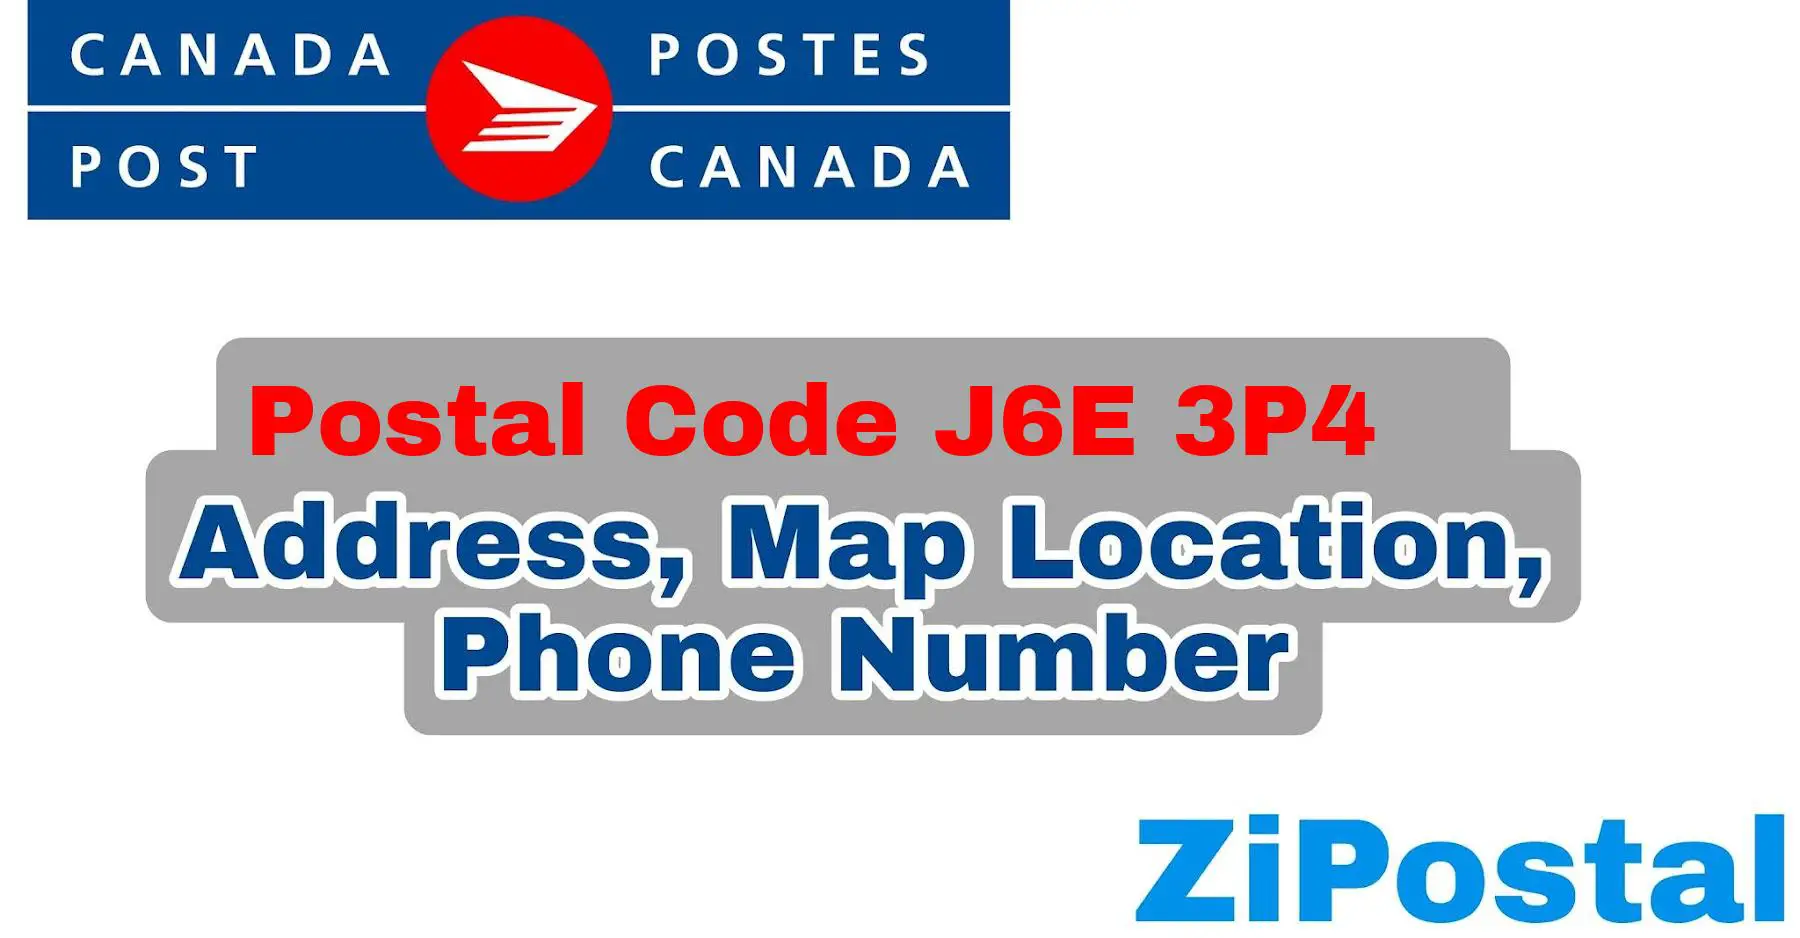 Postal Code J6E 3P4 Address Map Location and Phone Number